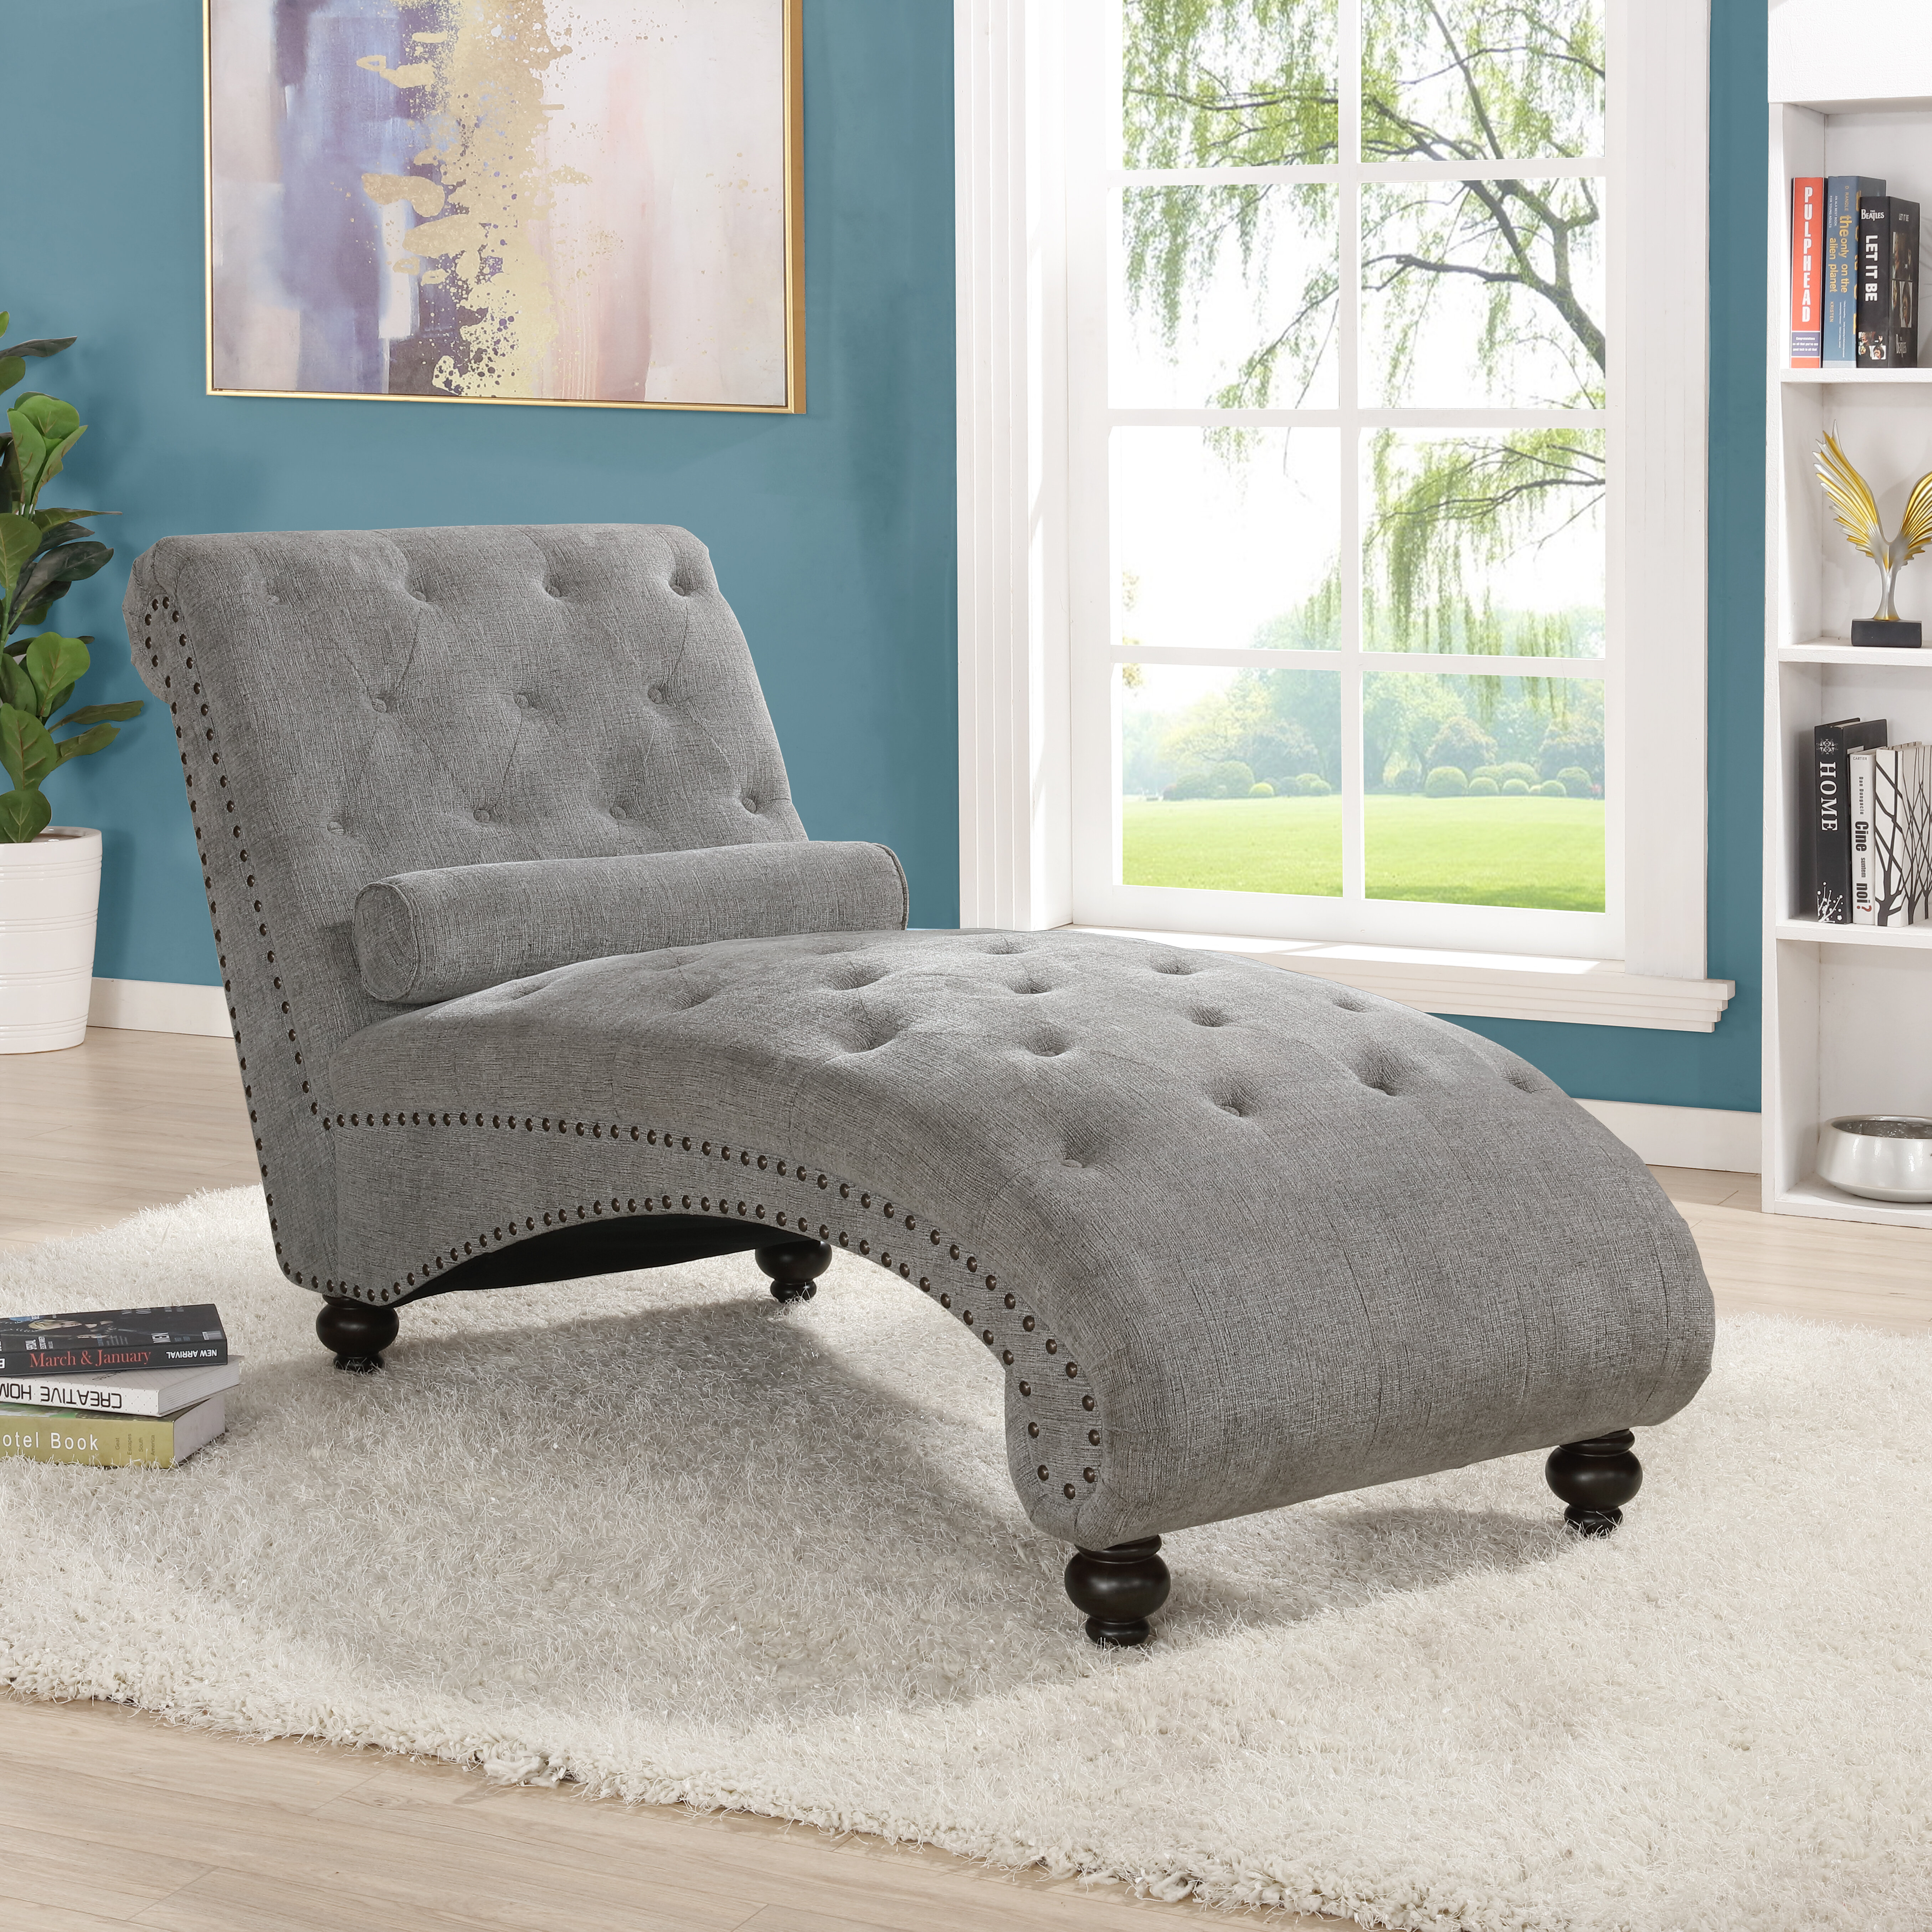 Anastagio Upholstered Chaise Lounge